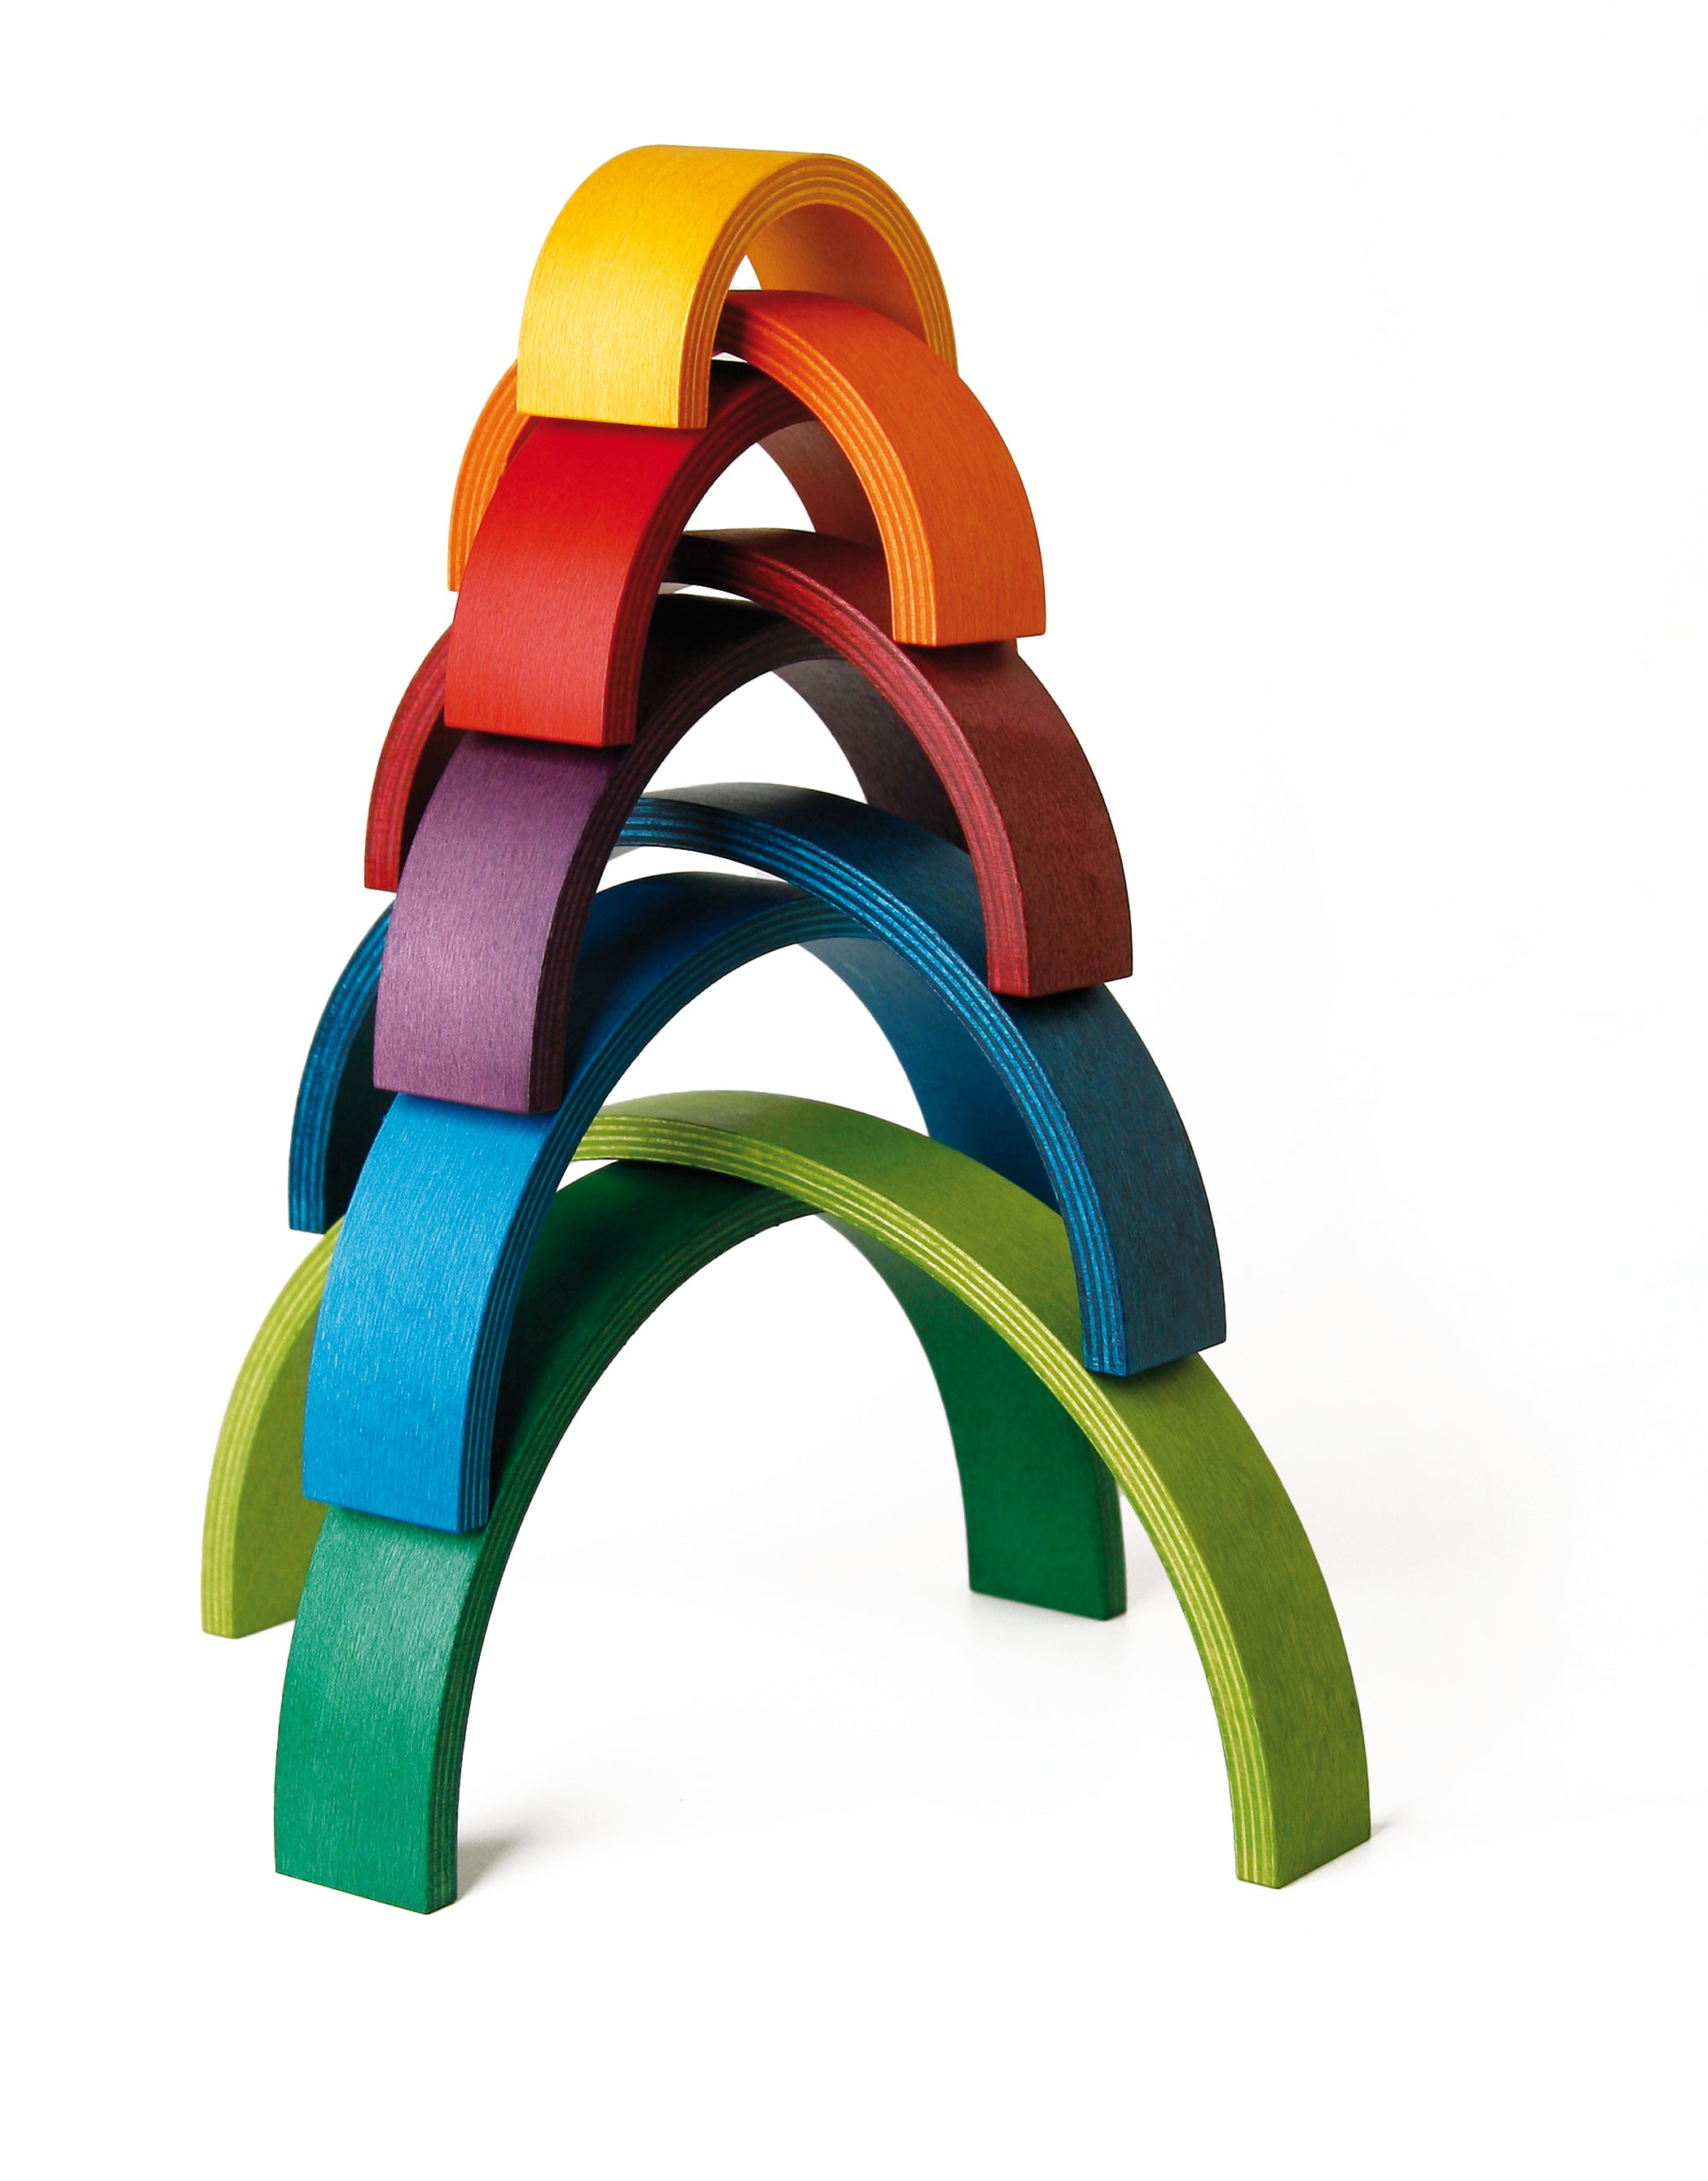 Naef Wooden Rainbow Stacking Toy Stacking Toys